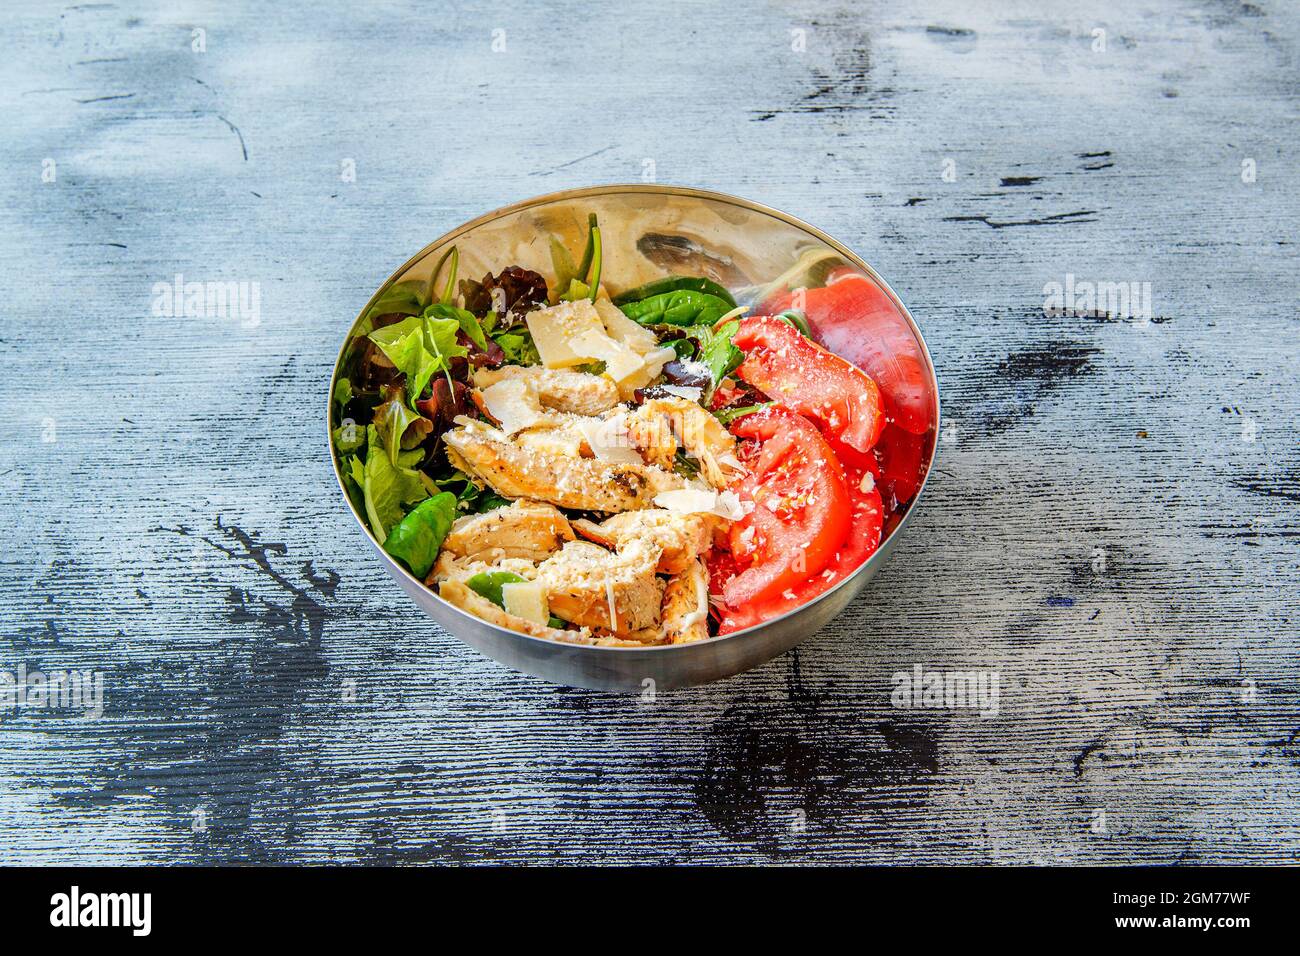 metal bowl with roast chicken, parmesan cheese flakes, special sliced tomatoes, leaves of lettuce sprouts and white rice at the base on a blue and bla Stock Photo